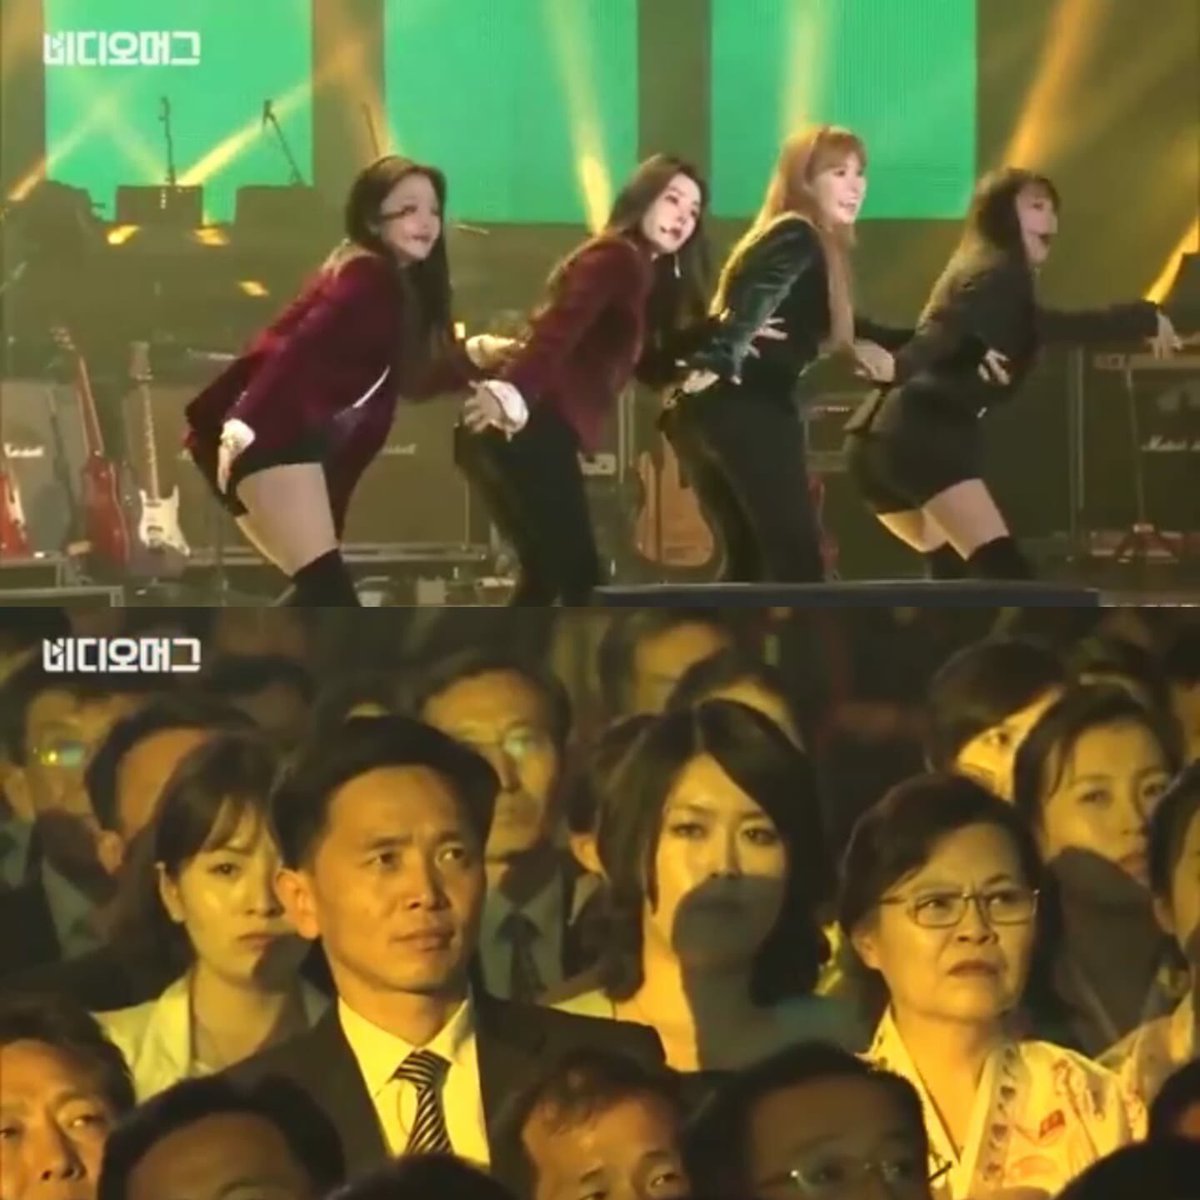 This image of North Koreans witnessing a Kpop performance in Pyongyang always makes me laugh